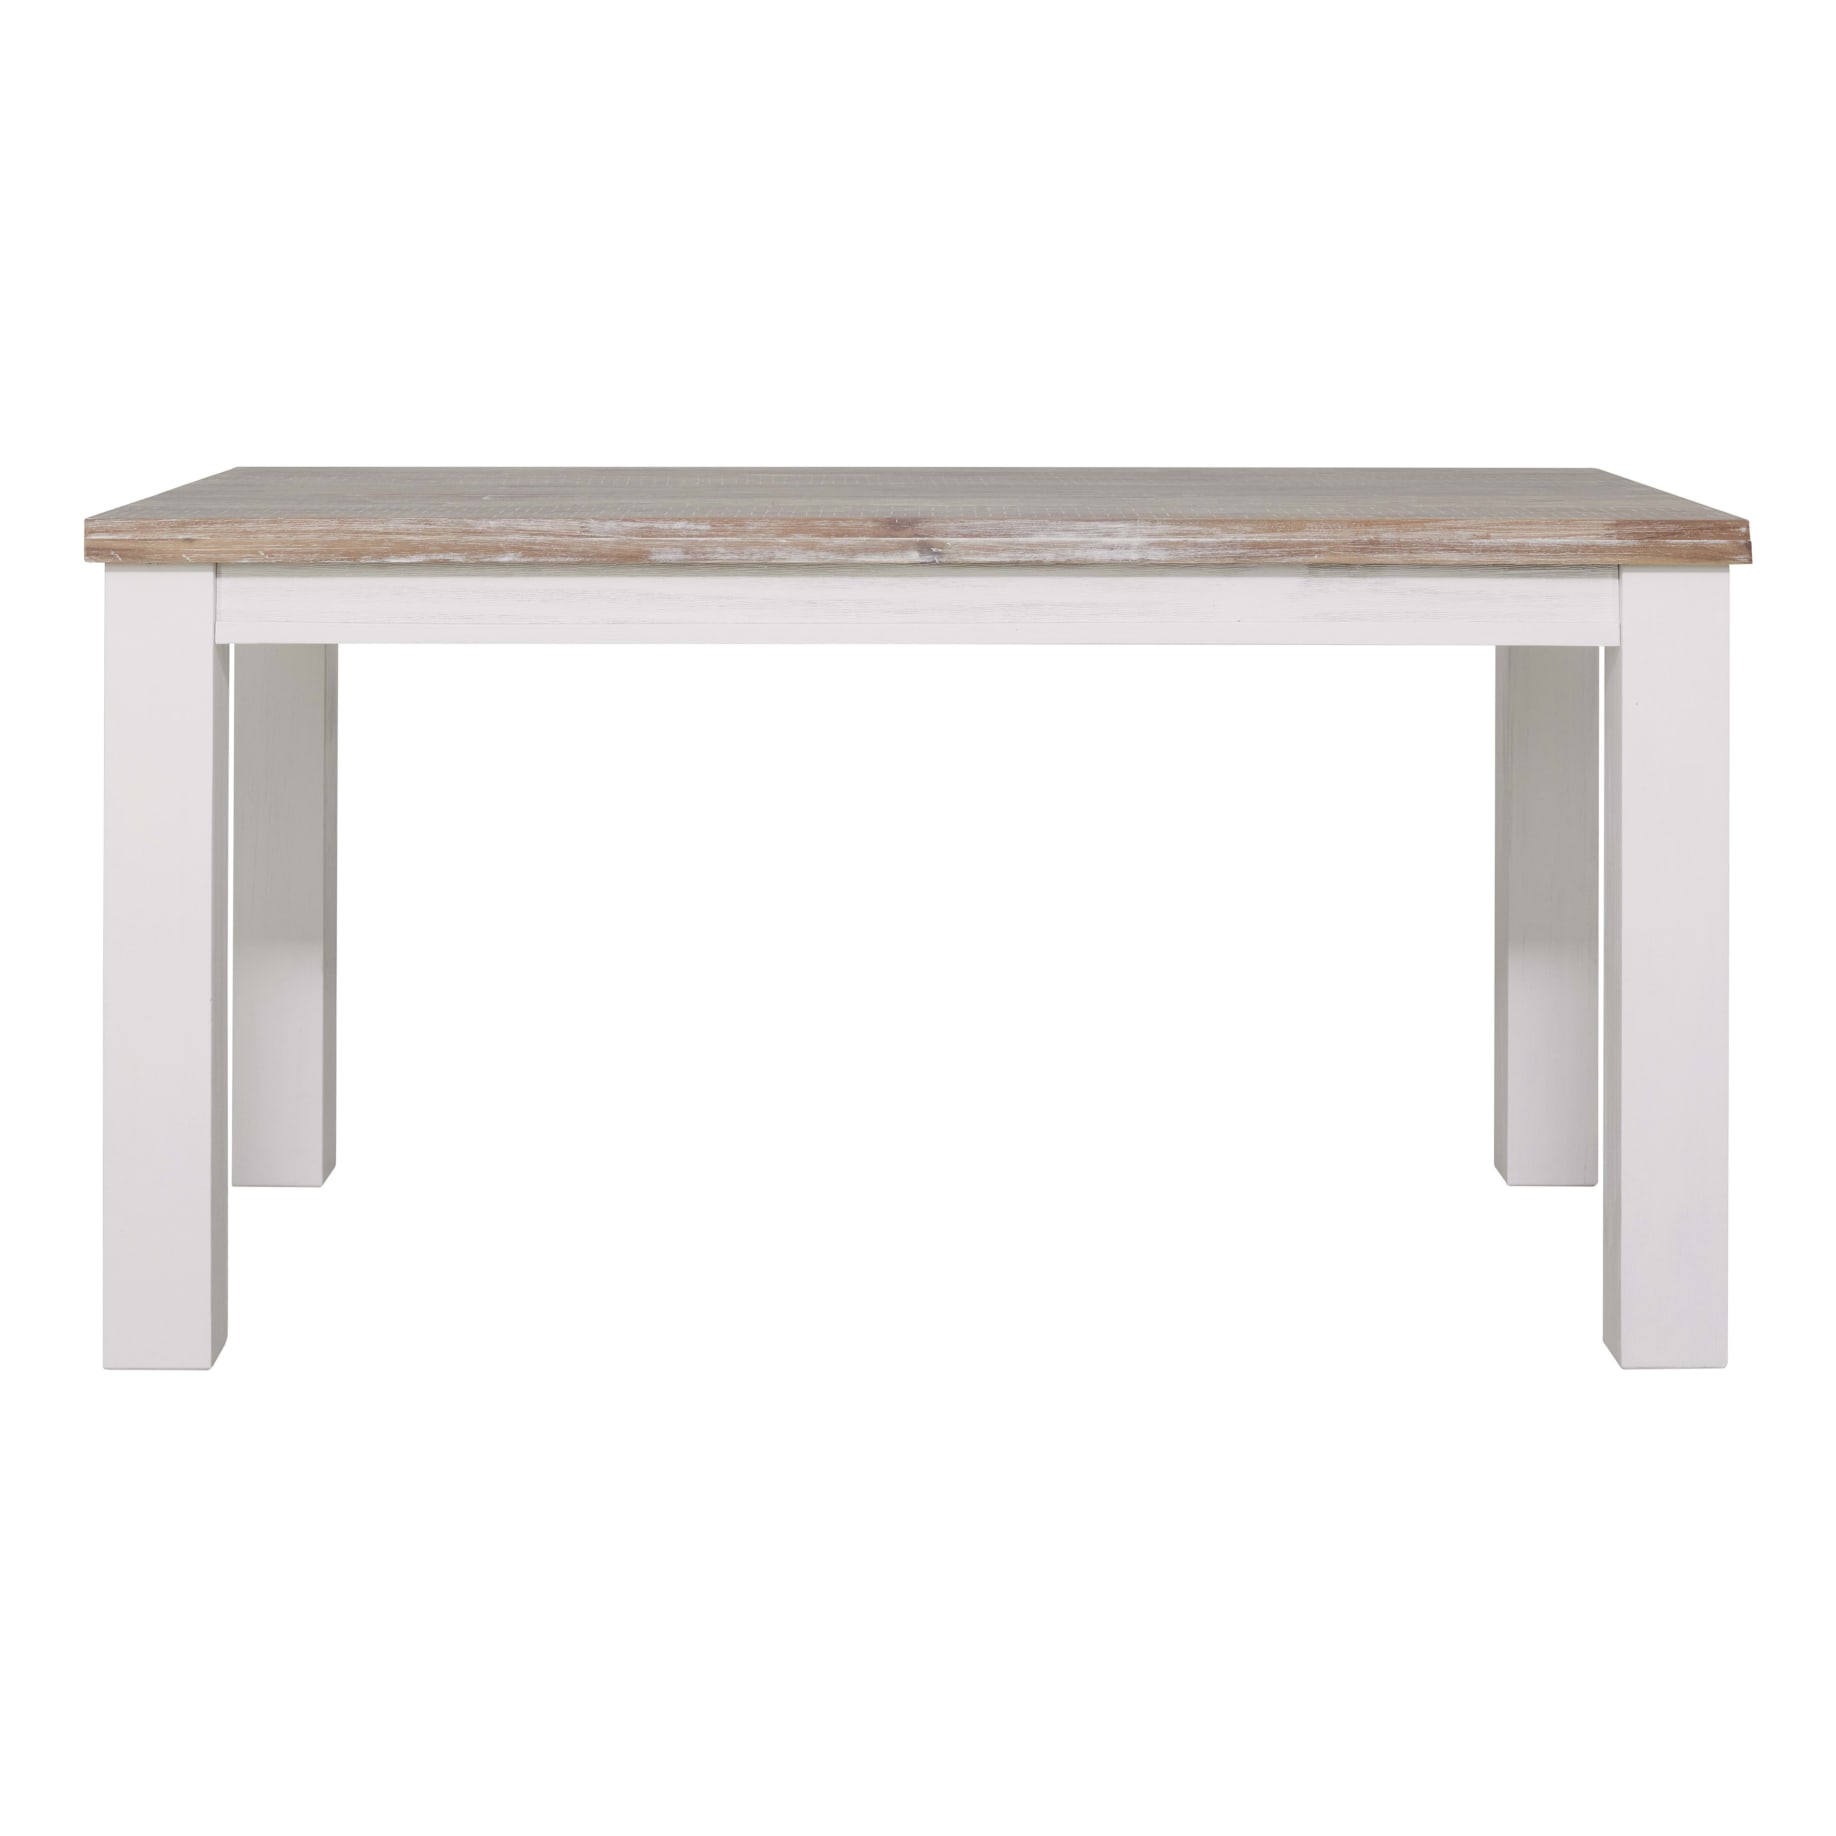 Halifax Dining Table 150cm in Acacia Timber Grey